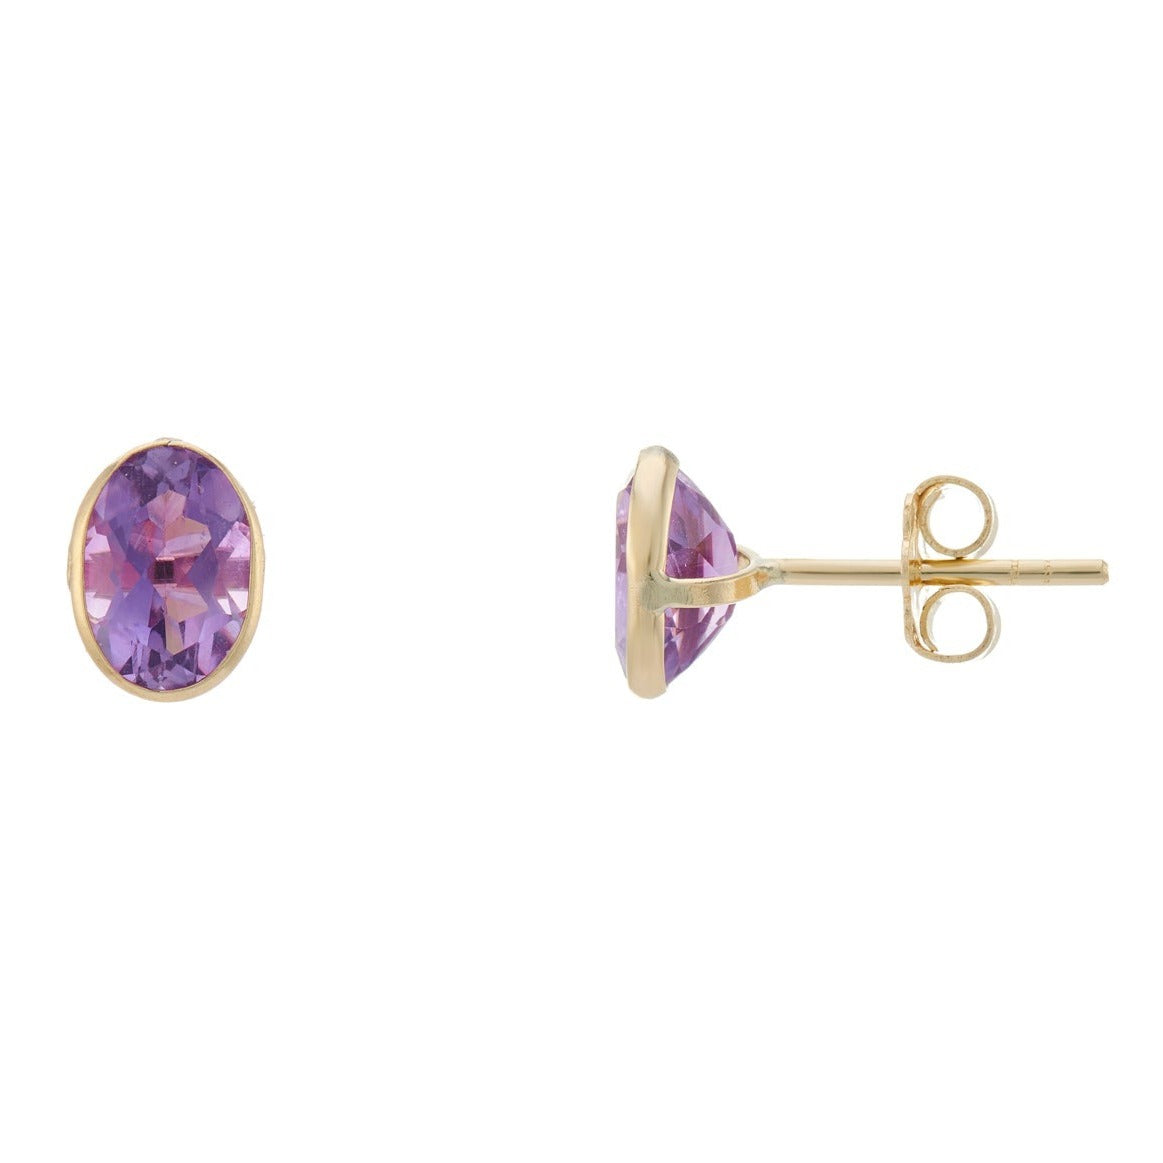 9ct gold 7x5mm rubover amethyst studs